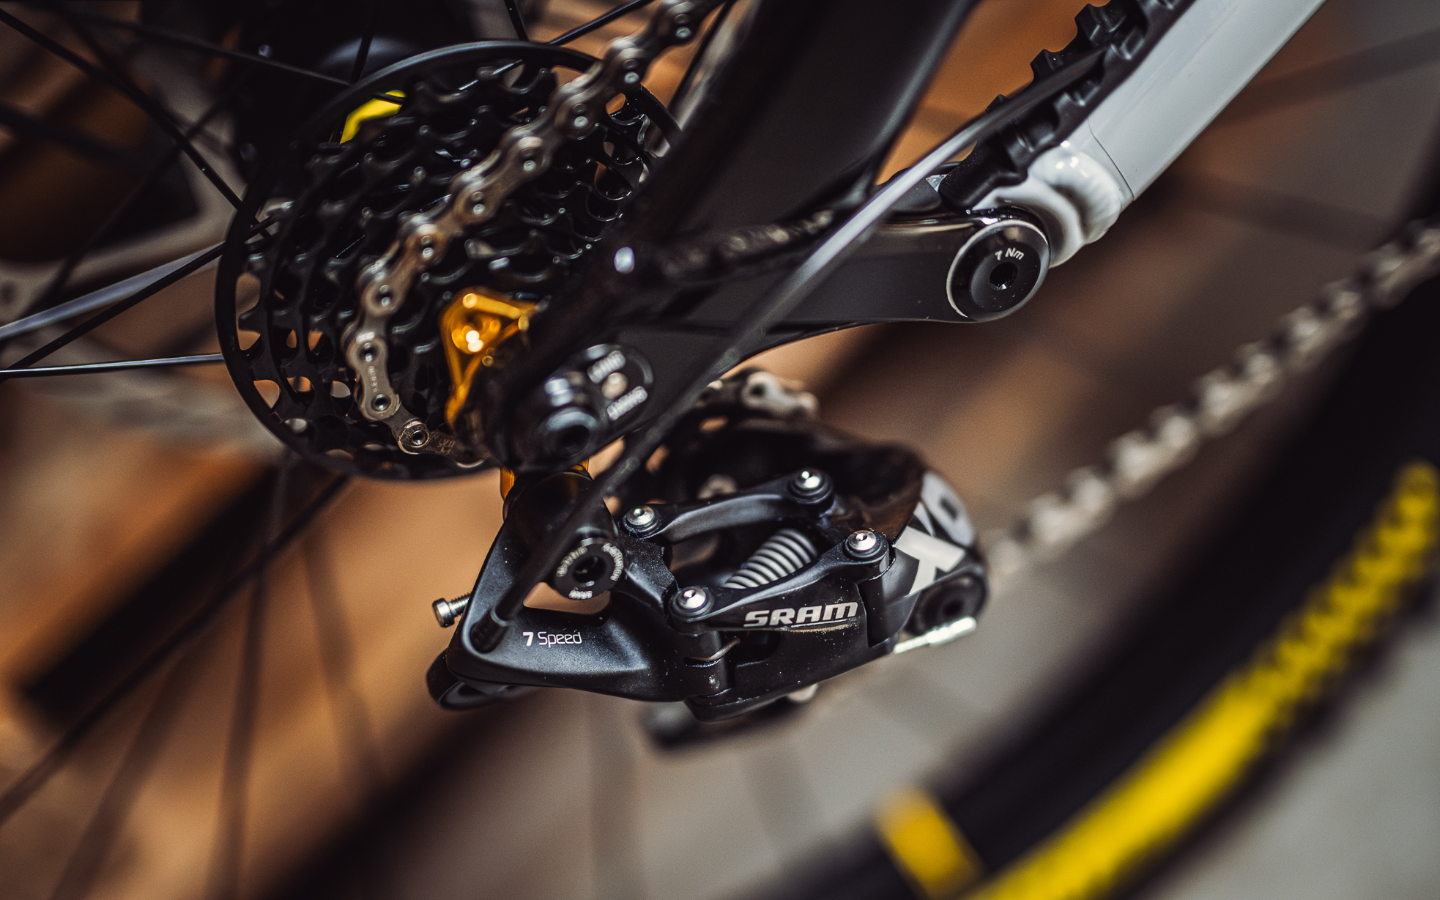 Drivetrain and brakes from SRAM